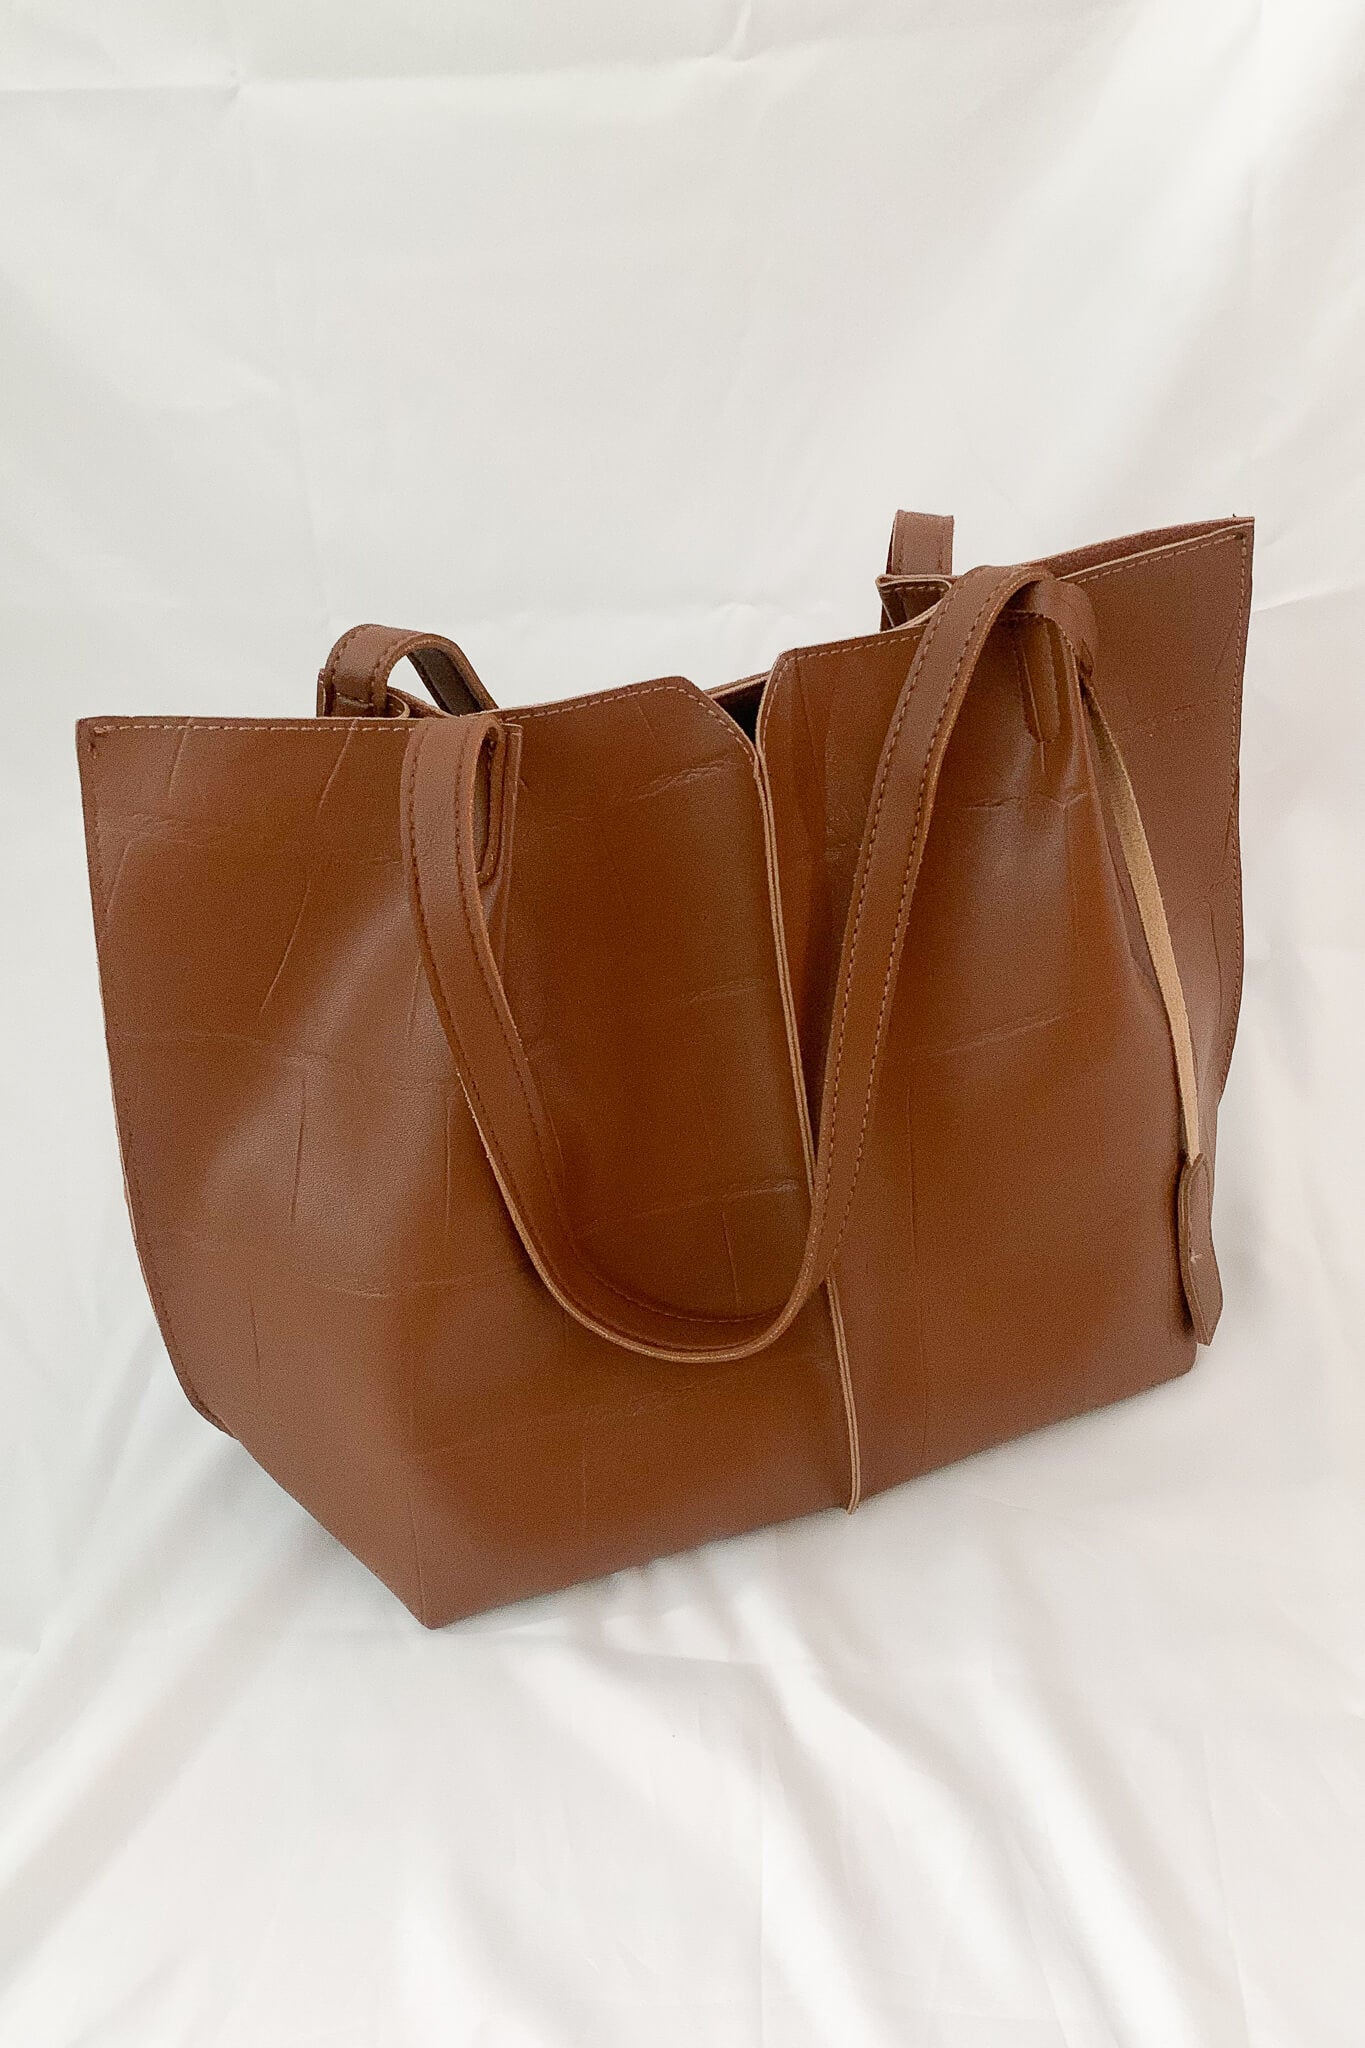 Big structured shoulder carry tote bag perfect for work carry.